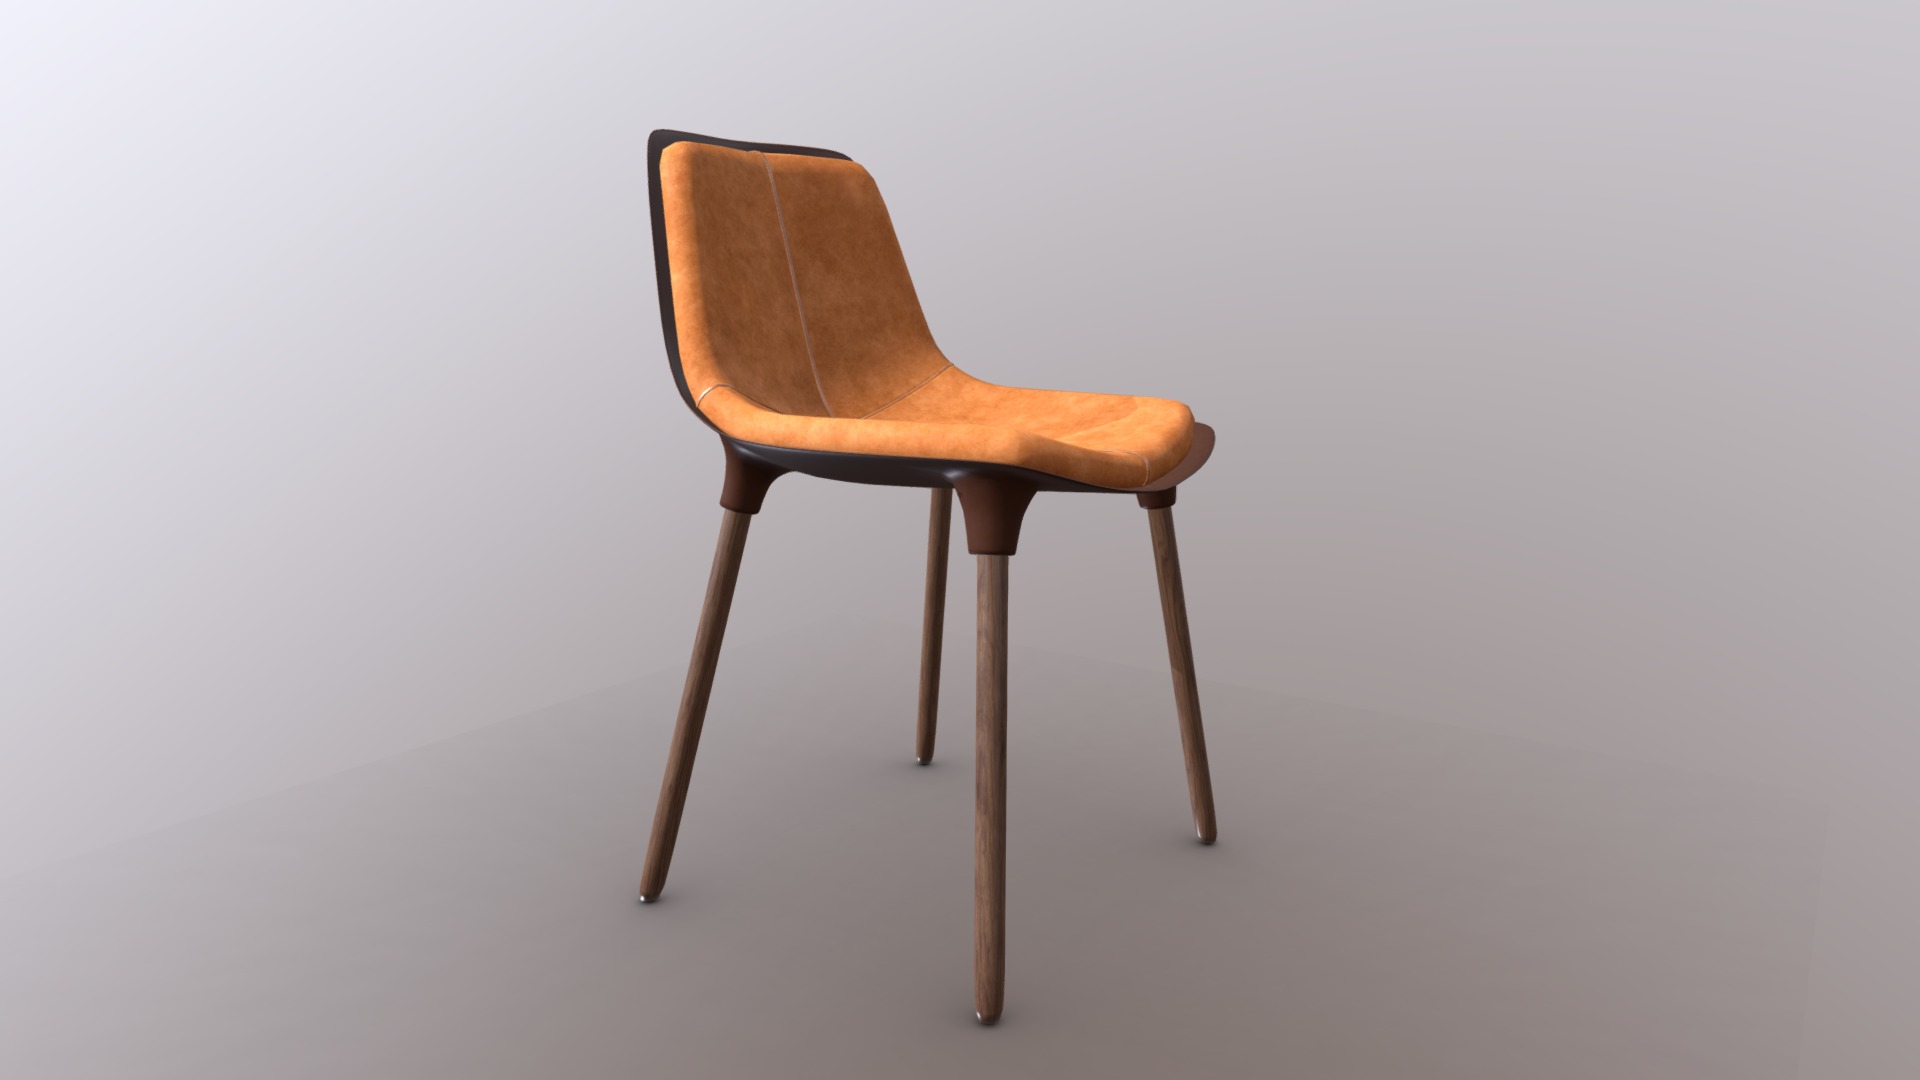 3D model Small Leather Dining Chair - This is a 3D model of the Small Leather Dining Chair. The 3D model is about a brown chair with a cushion.